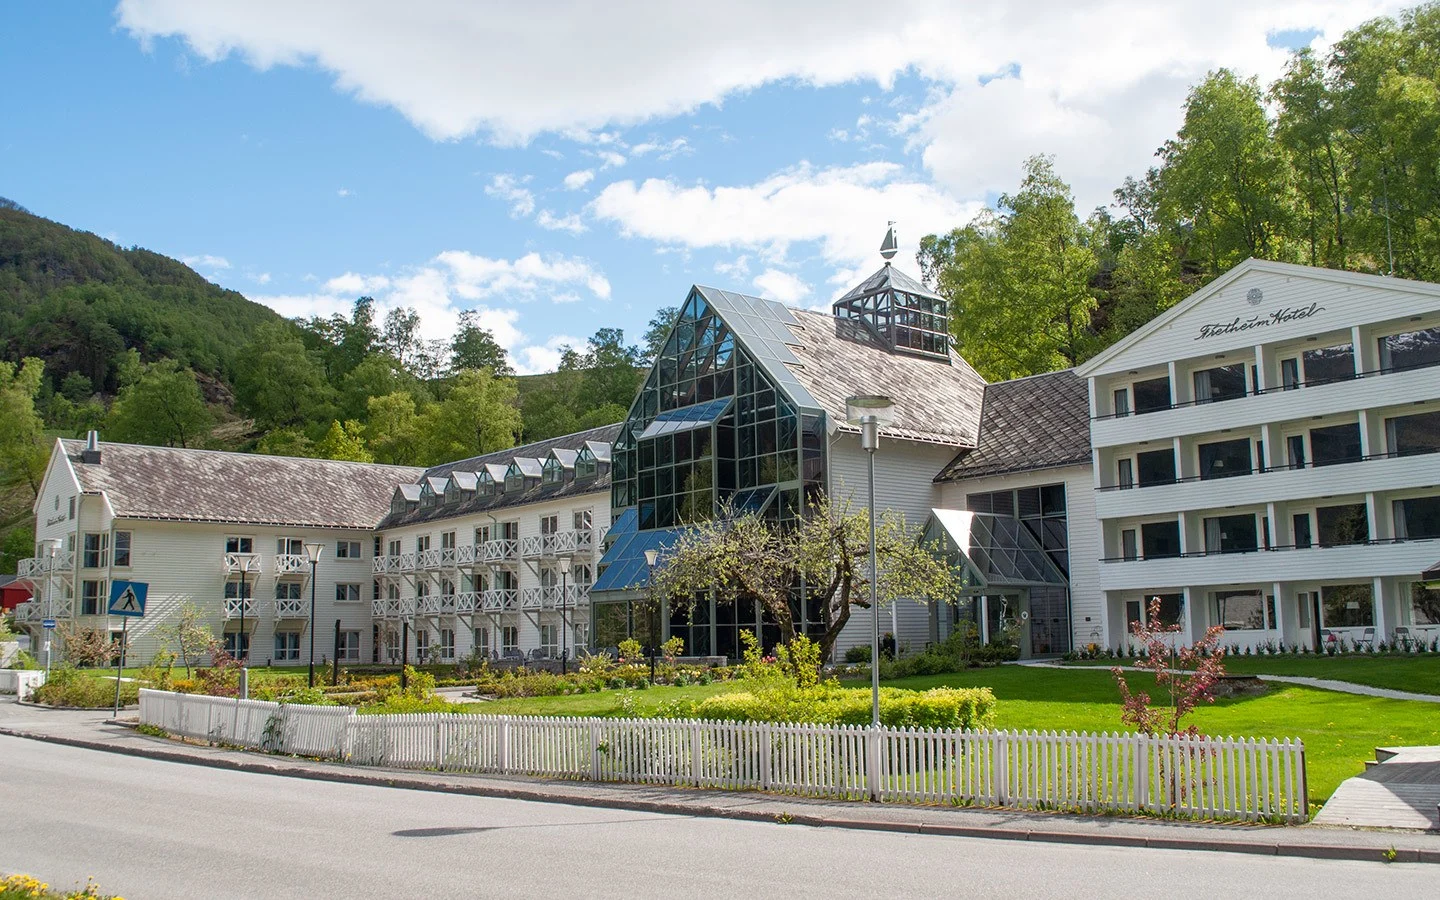 The Fretheim Hotel in Flam in the Norwegian fjords